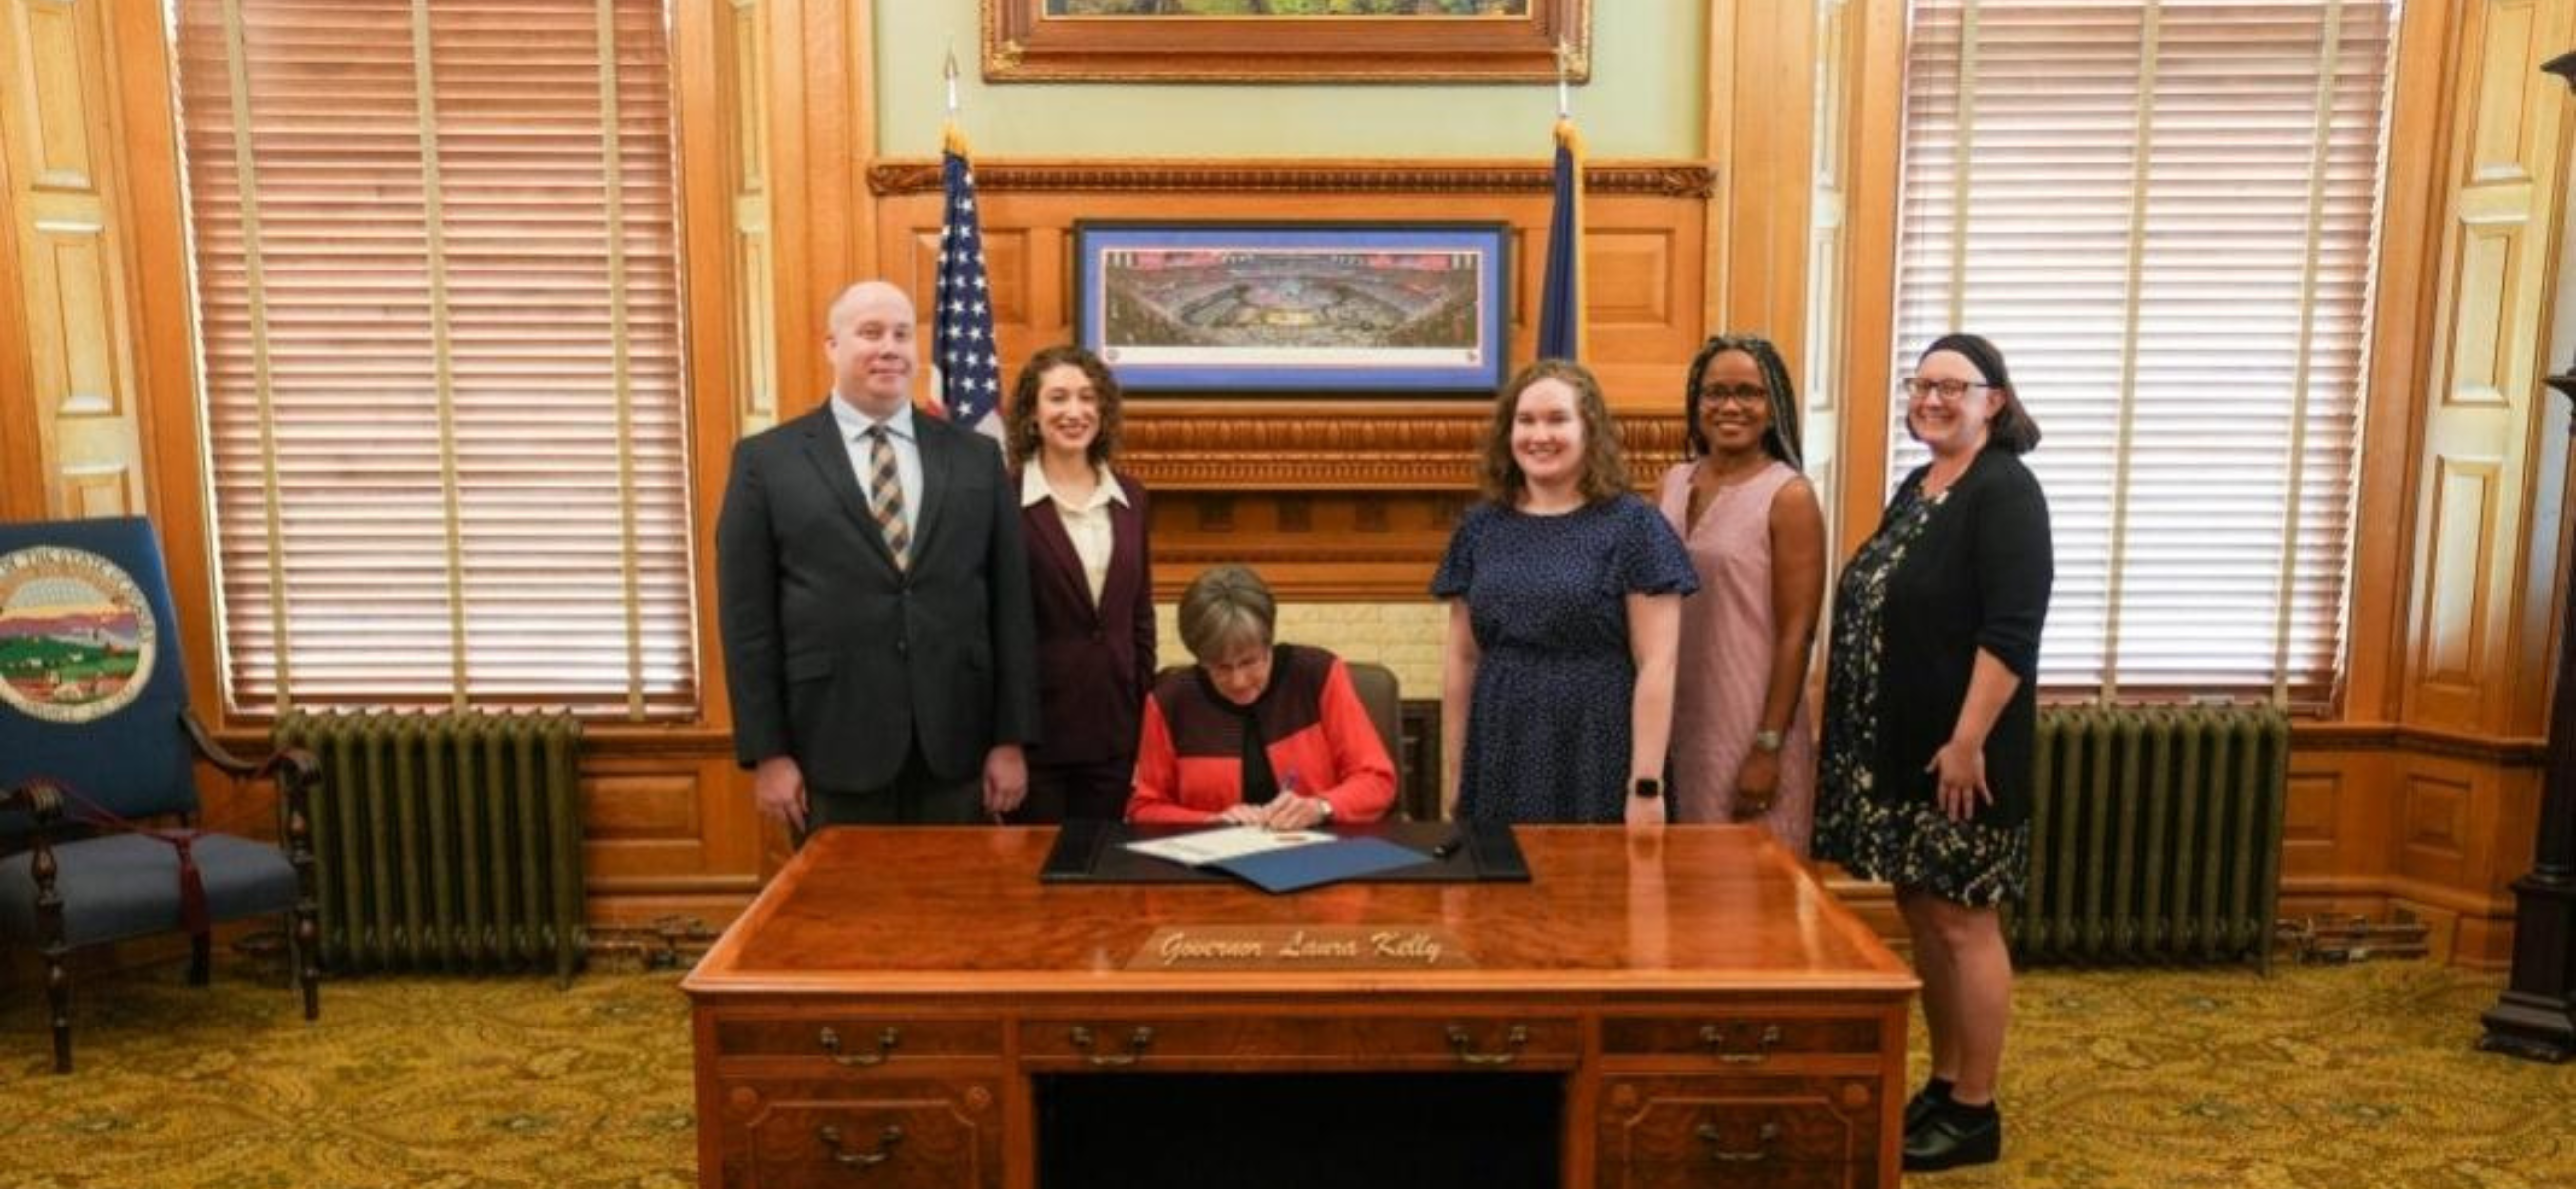 Gov. Laura Kelly signs a proclamation declaring Sept. 19, 2023, as Kansas Voter Registration Day flanked by State Librarian Ray Walling, Kansas Hispanic American Affairs Commission Executive Director Carla Rivas-D'Amico; State Library reference librarian Leah Grote, Kansas African American Affairs Commission Executive Director Stacey Knoell, and Lissa Staley, outreach librarian at the Topeka Shawnee County Public Library.